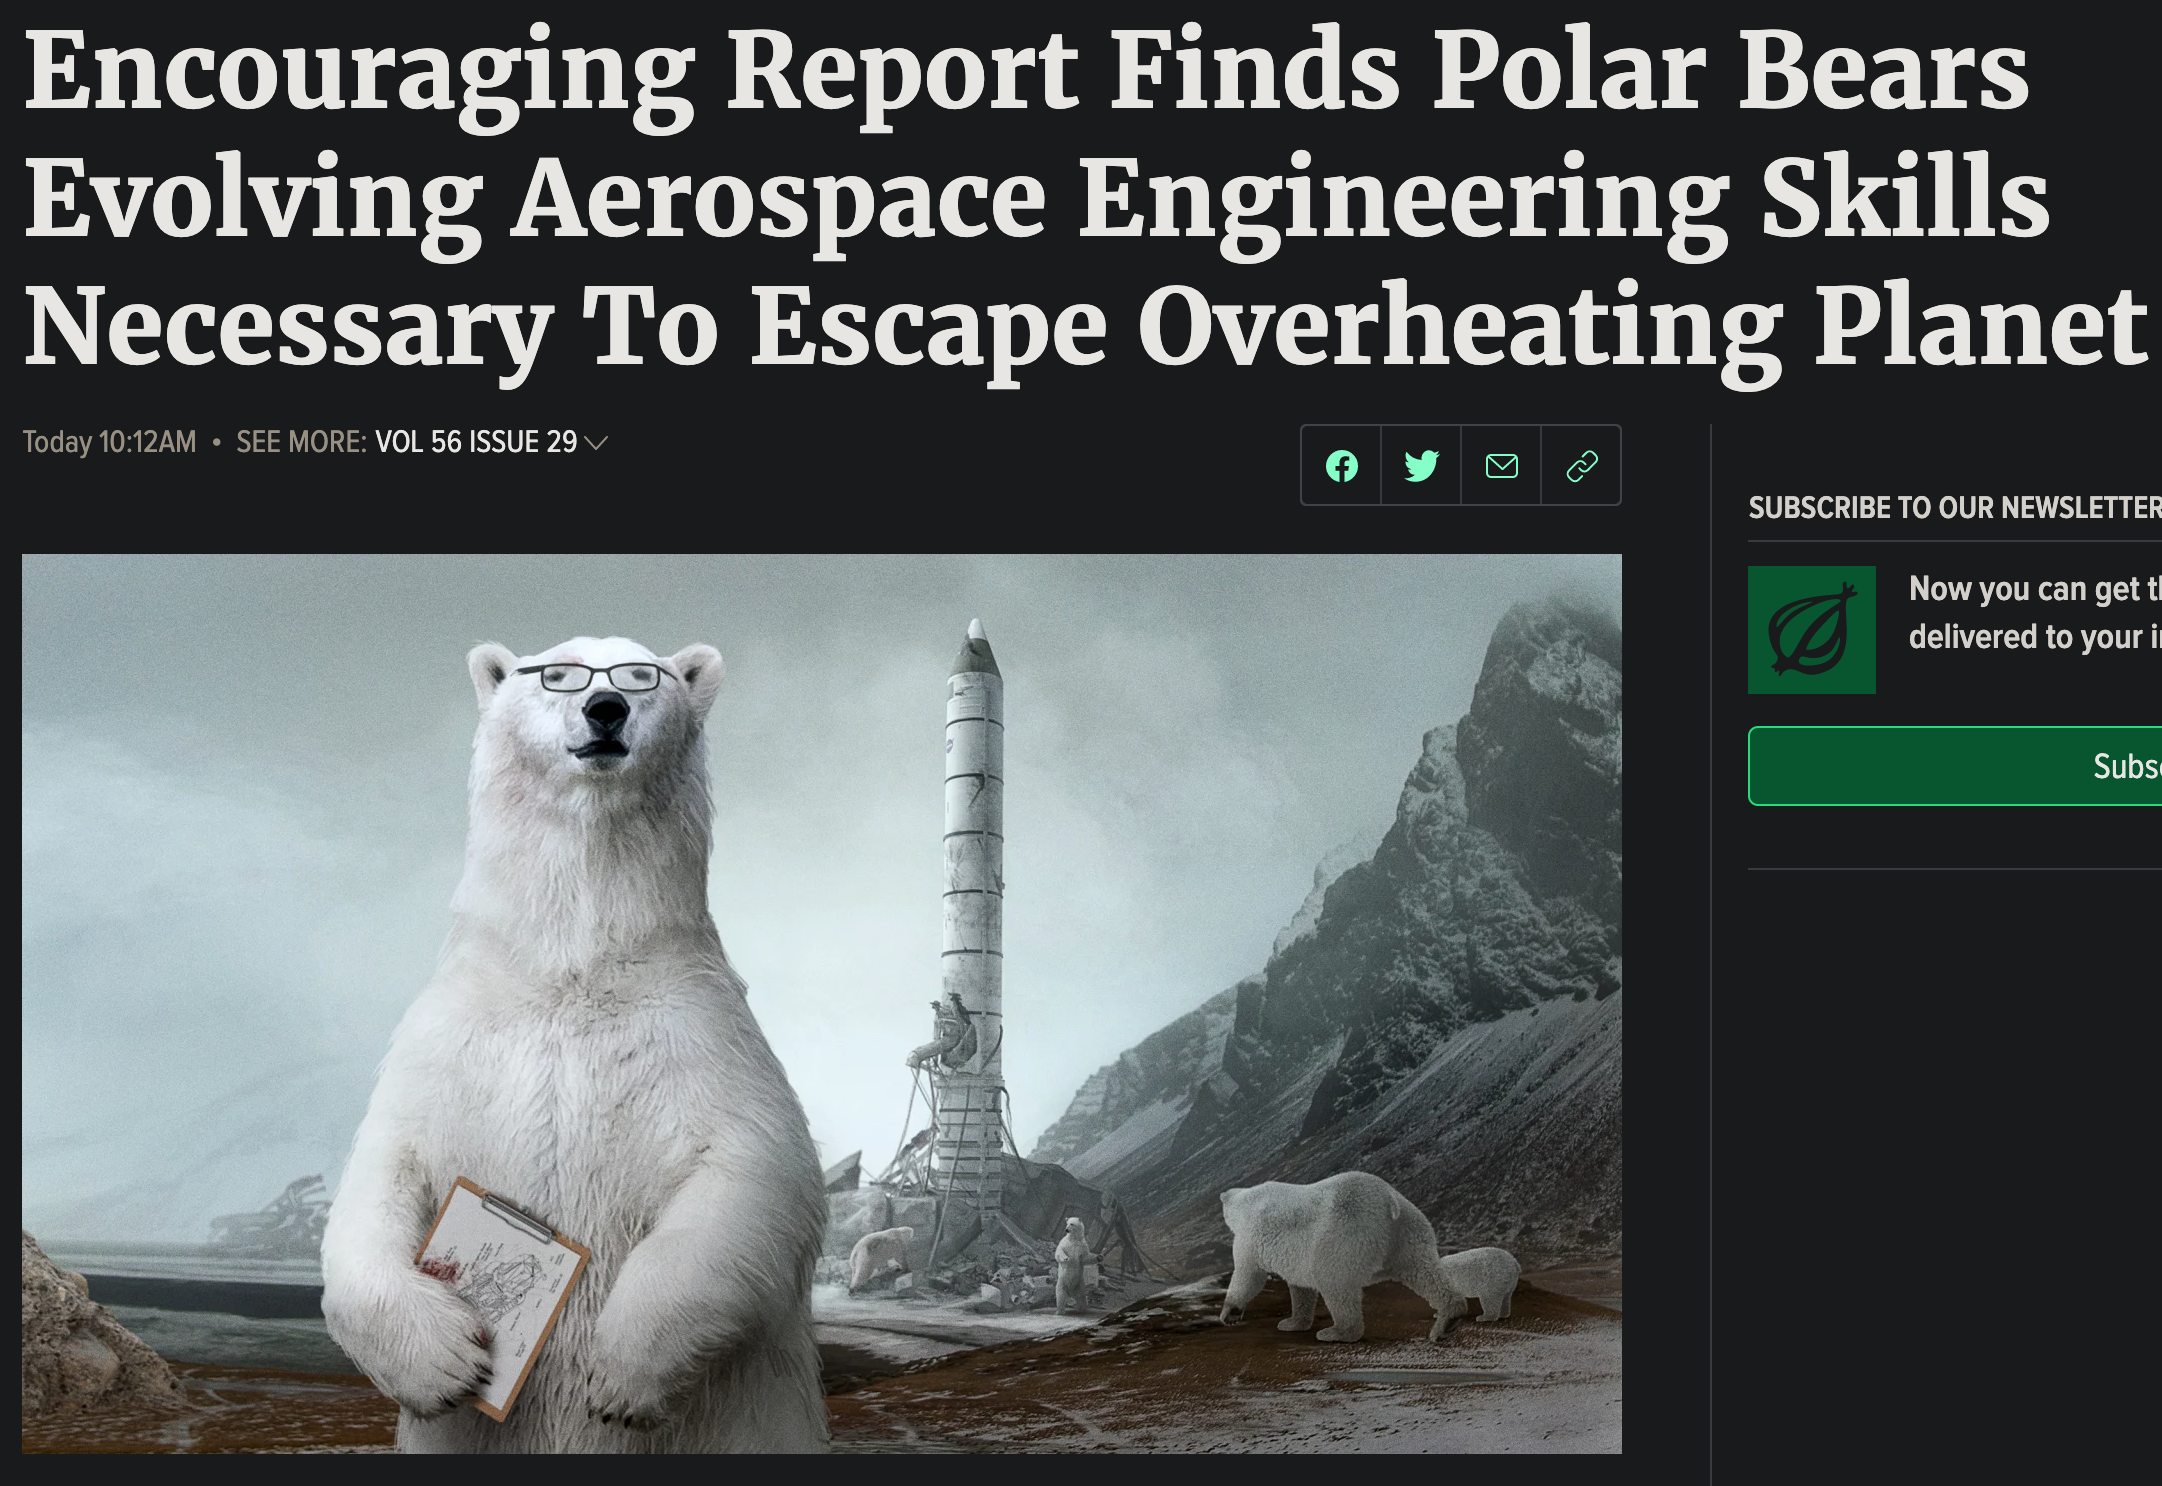 funny memes and random pics - fauna - Encouraging Report Finds Polar Bears Evolving Aerospace Engineering Skills Necessary To Escape Overheating Planet Today Am. See More Vol 56 Issue 29 Subscribe To Our Newsletter Now you can get to delivered to your in 